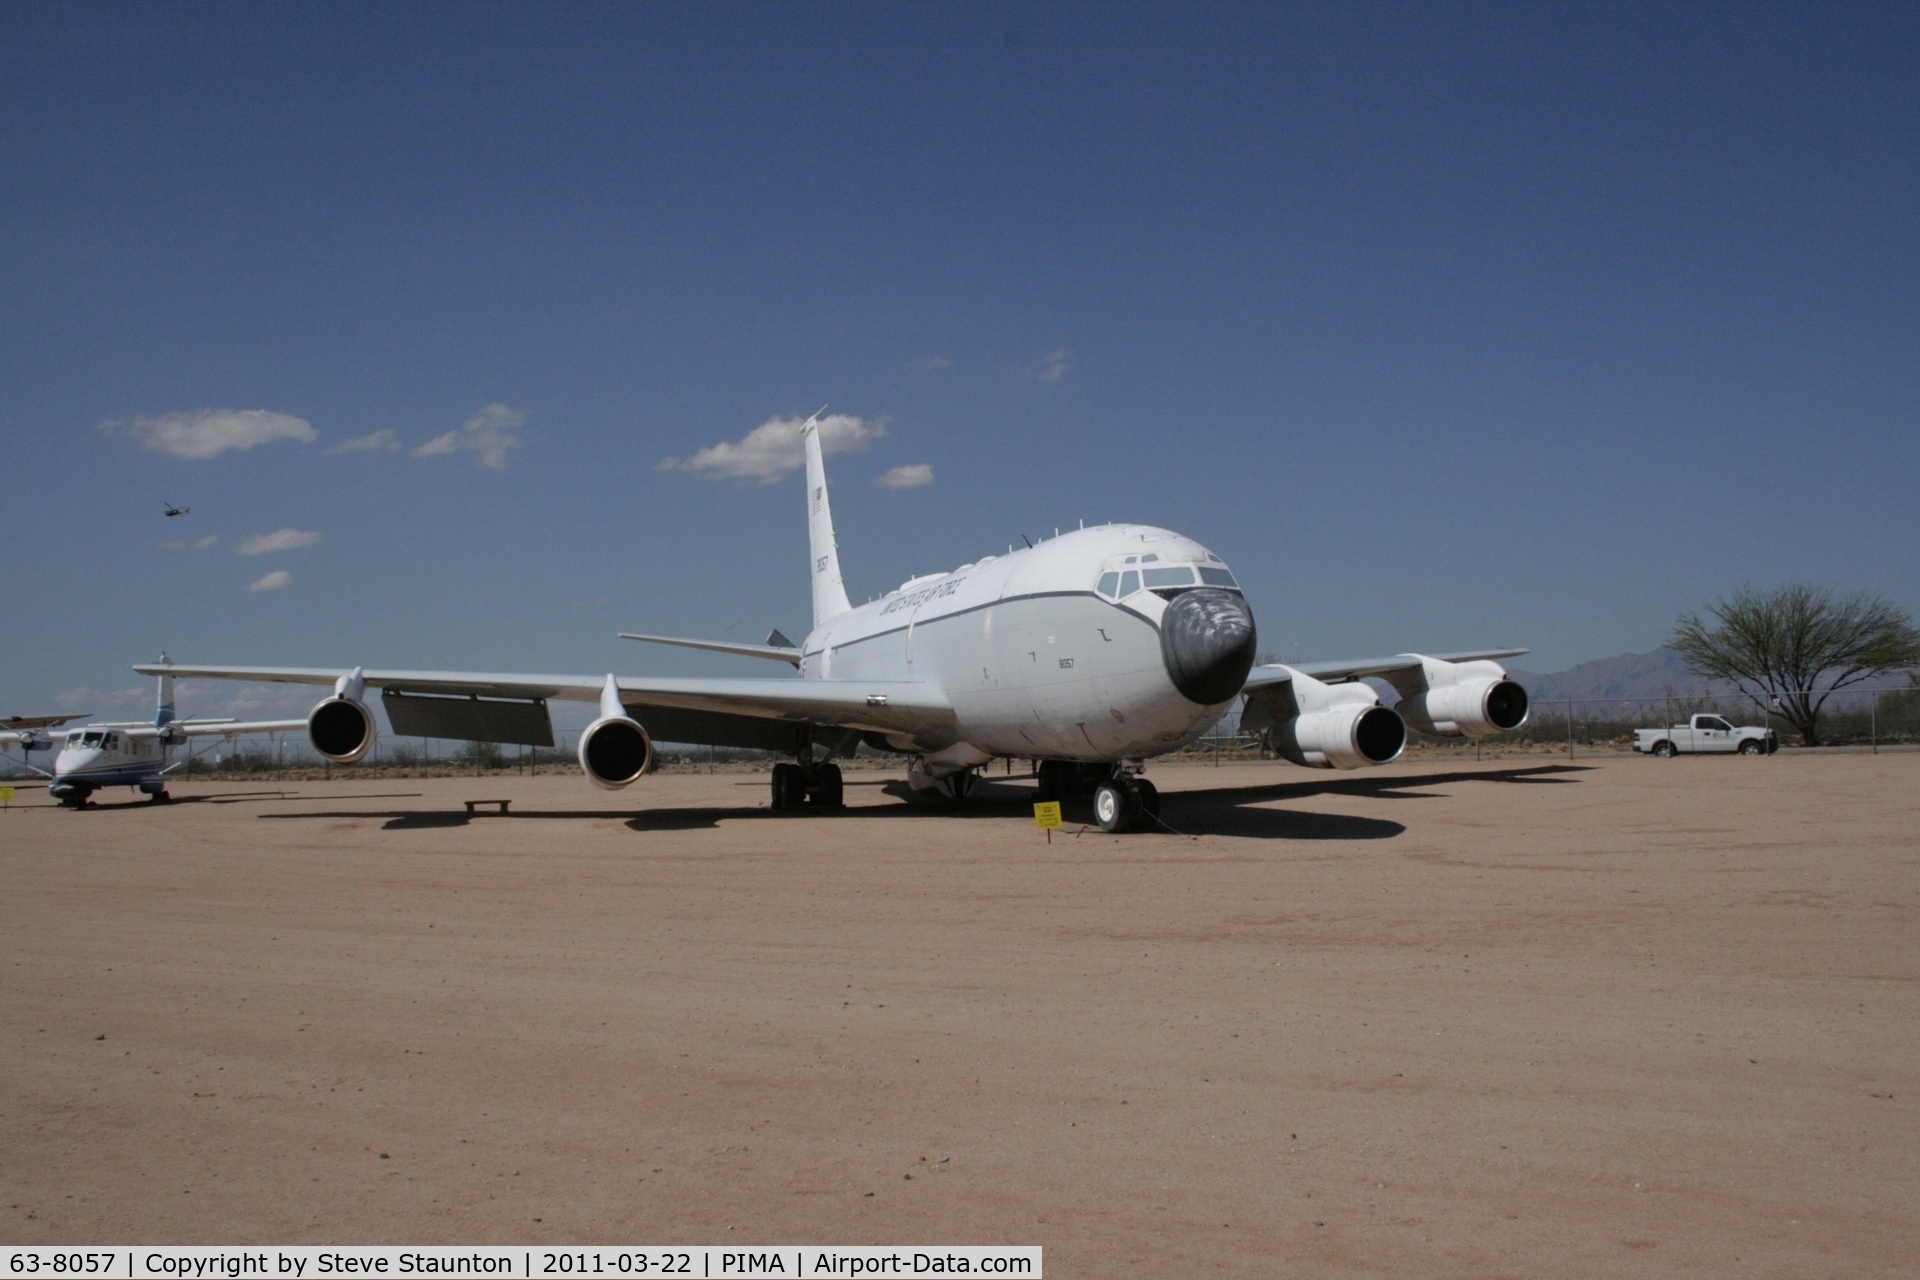 63-8057, Boeing EC-135J Stratotanker C/N 18705, Taken at Pima Air and Space Museum, in March 2011 whilst on an Aeroprint Aviation tour